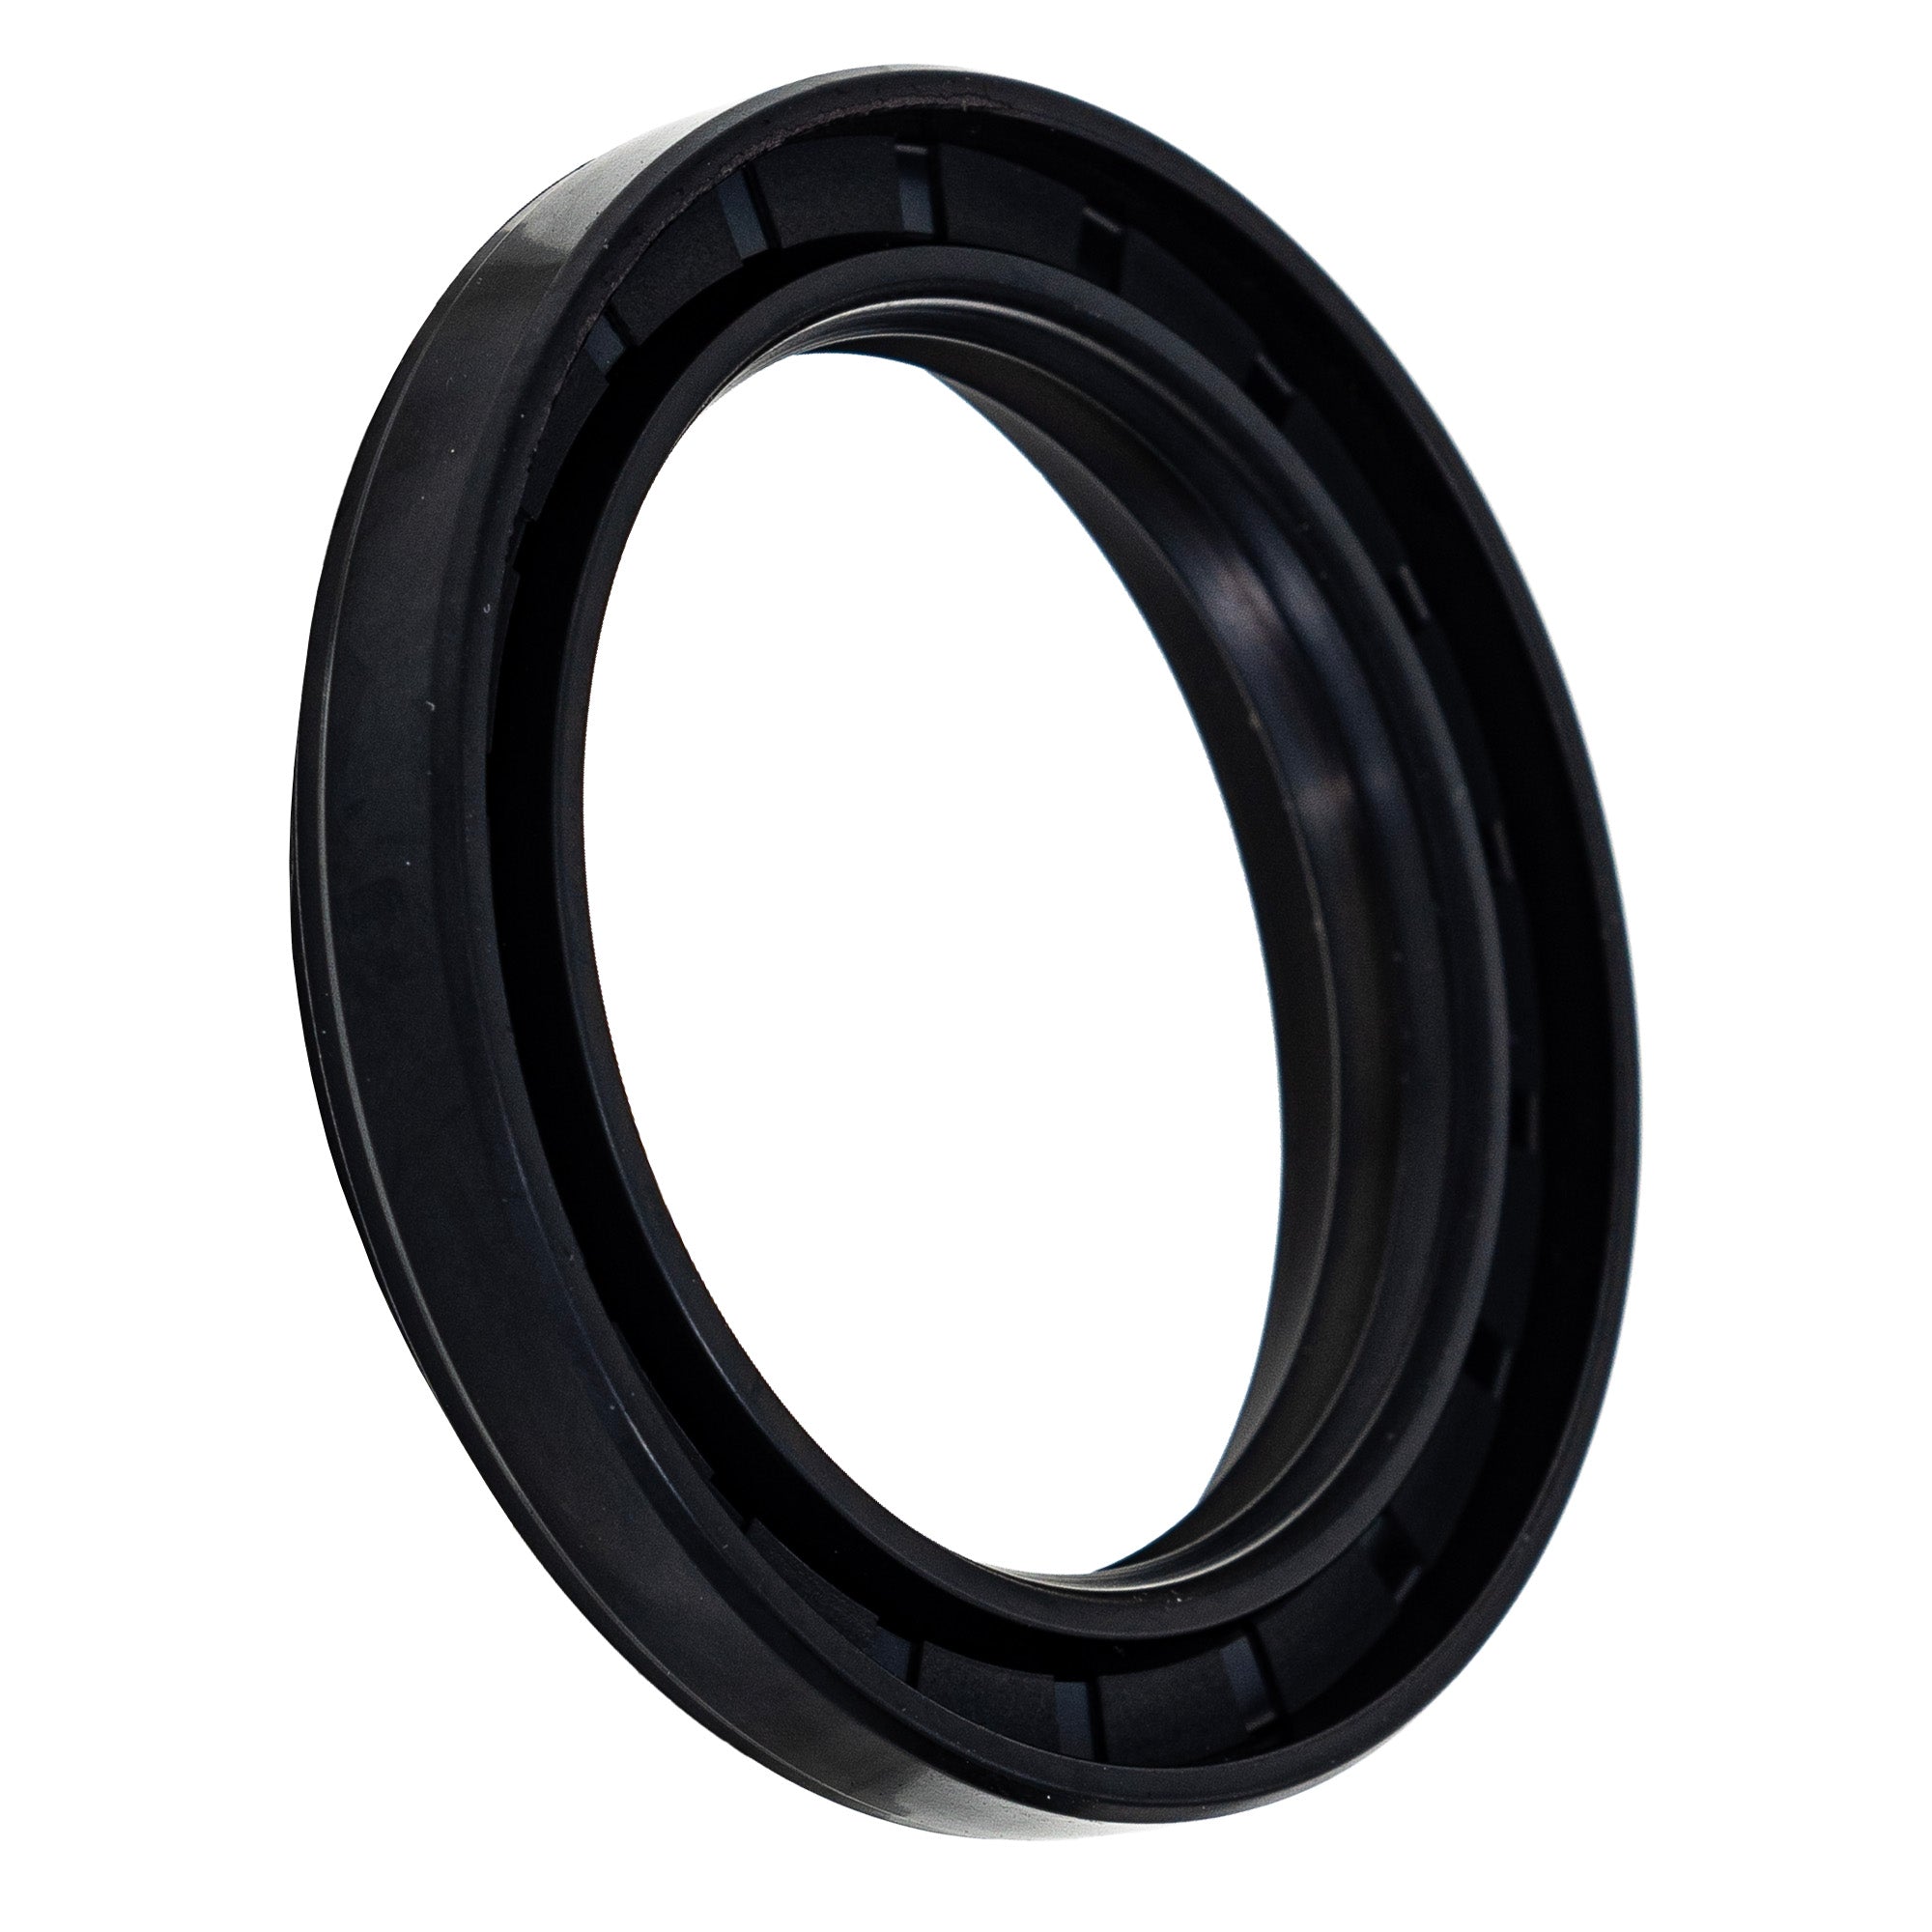 Oil Seal for Yamaha 93106-46003-00 Raptor 700 700R TCY 46x64x8/13mm